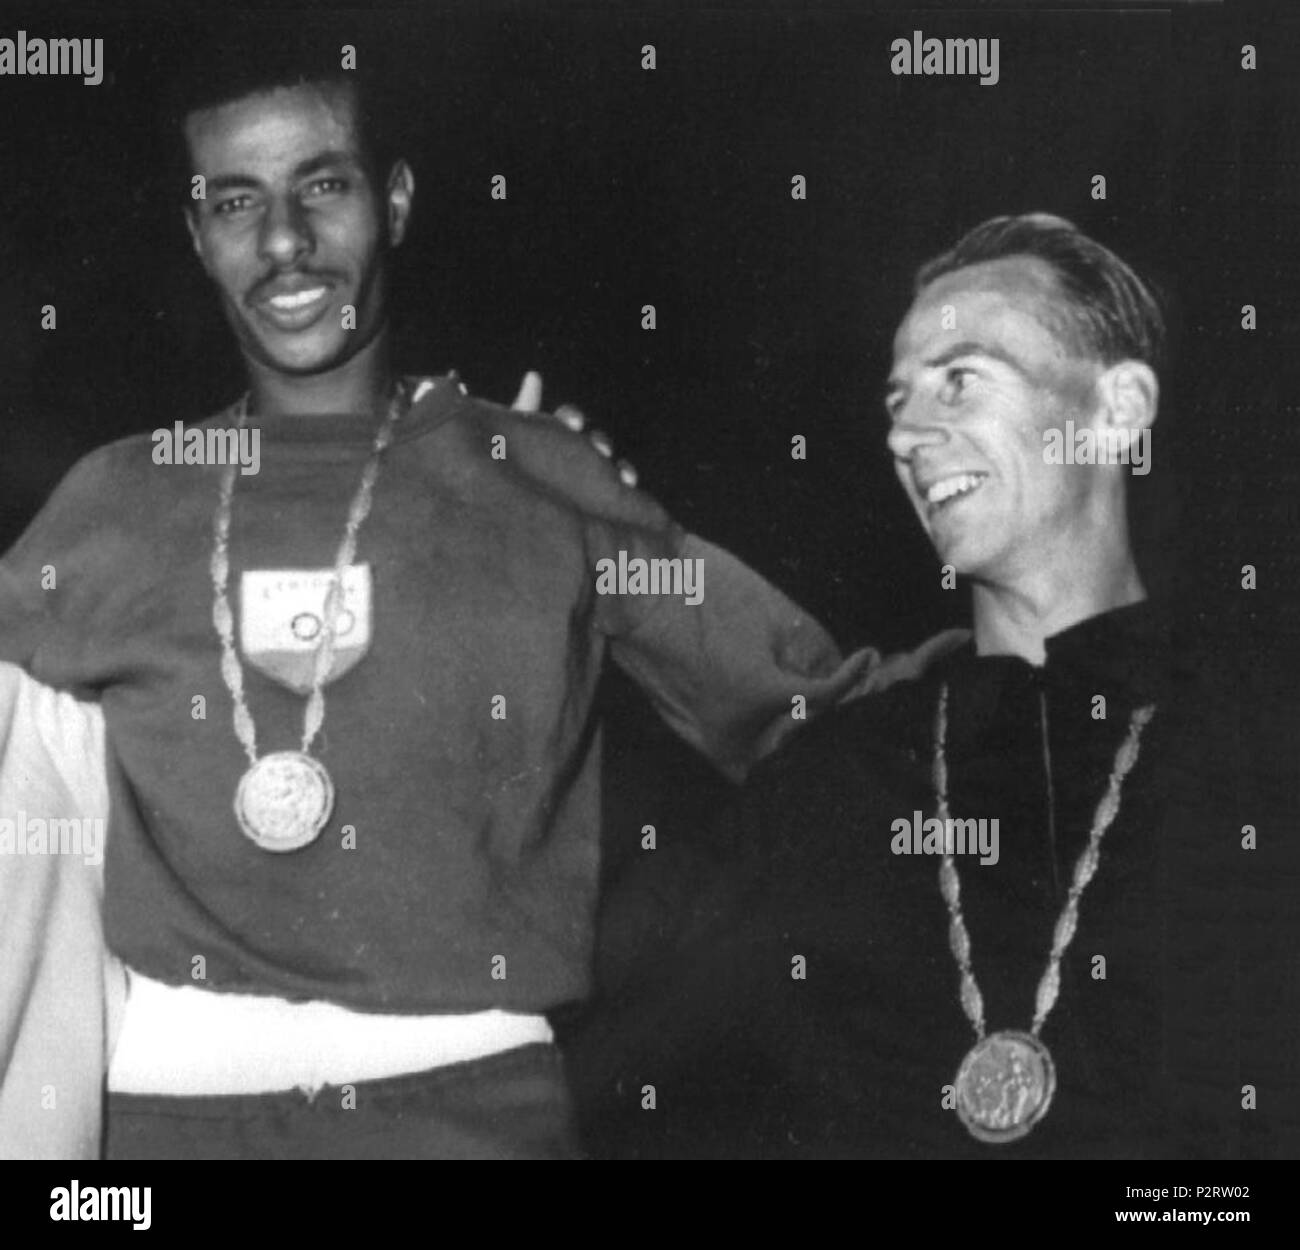 . Barry Magee (right) and Abebe Bikila at the 1960 Olympics . 1960. Unknown (ANSA.it) 3 Abebe Bikila, Barry Magee 1960 Stock Photo